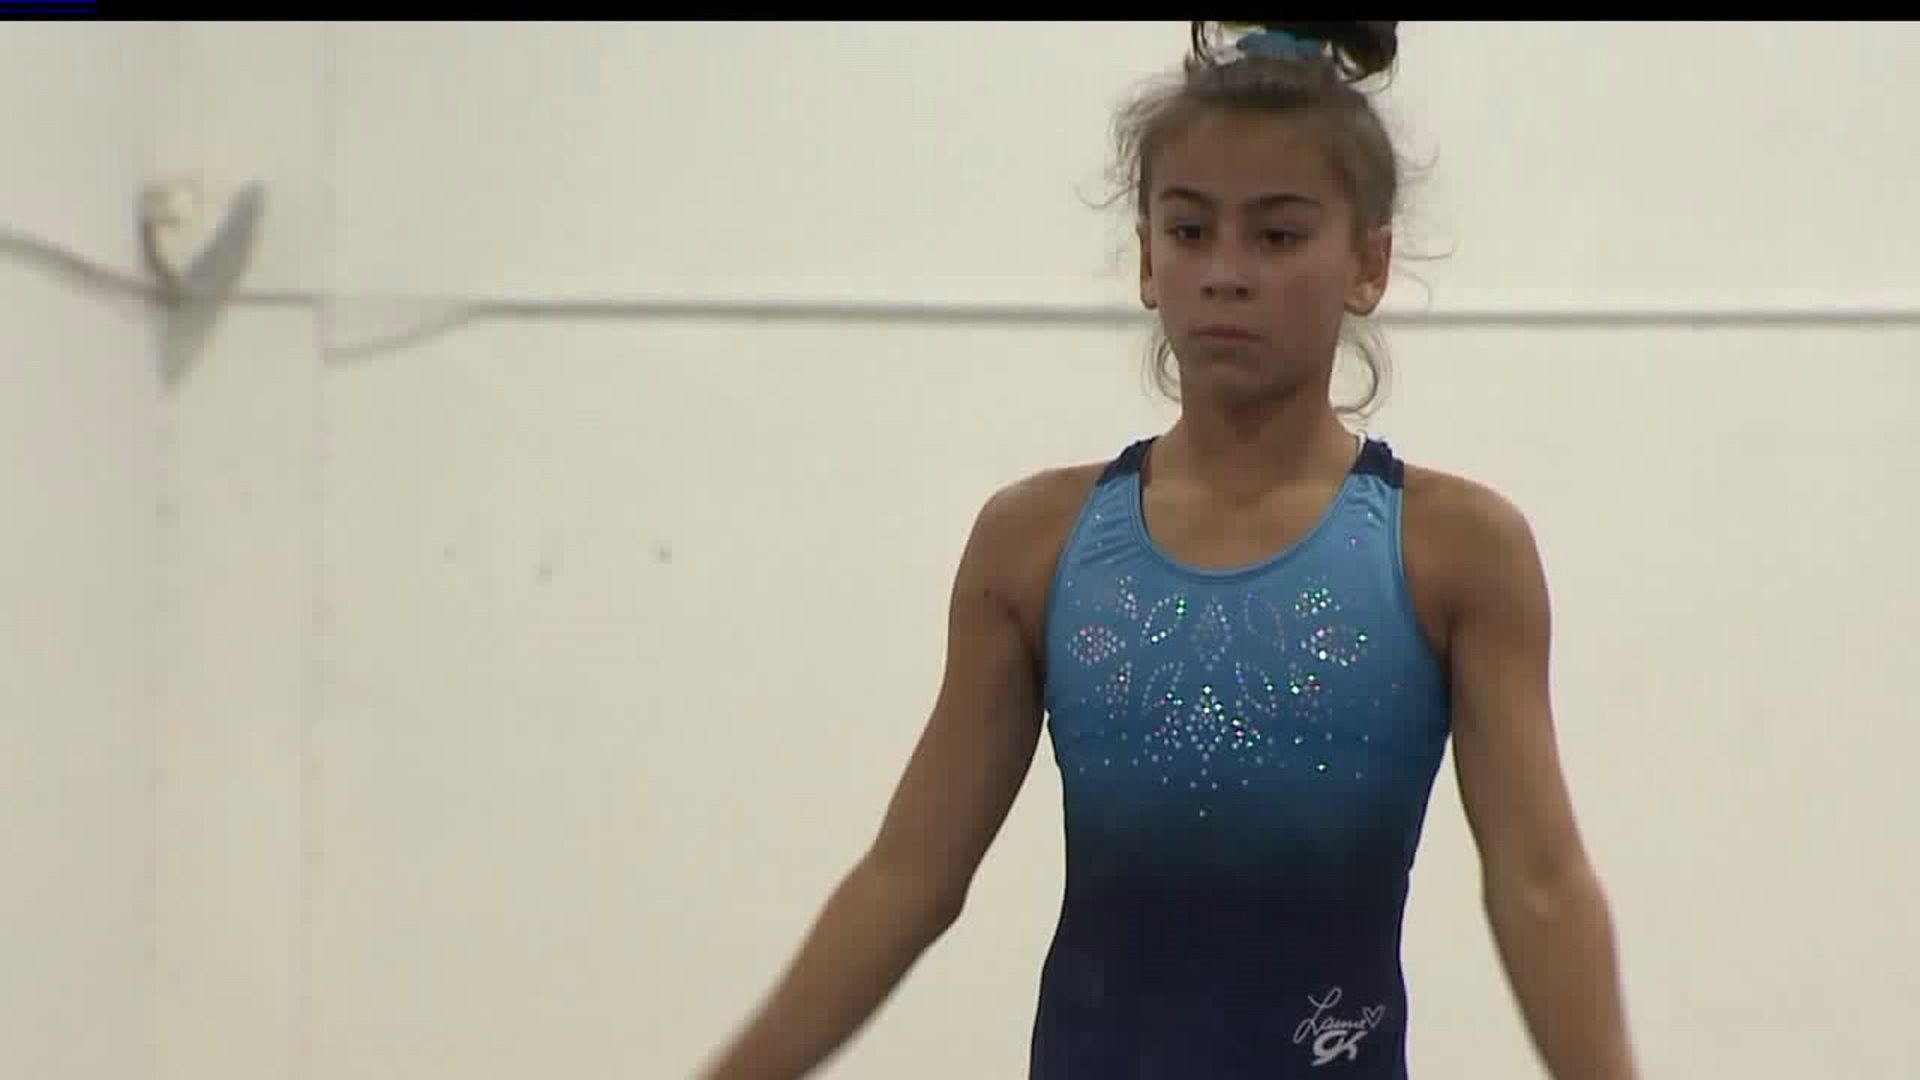 Local gymnasts qualify for nationals